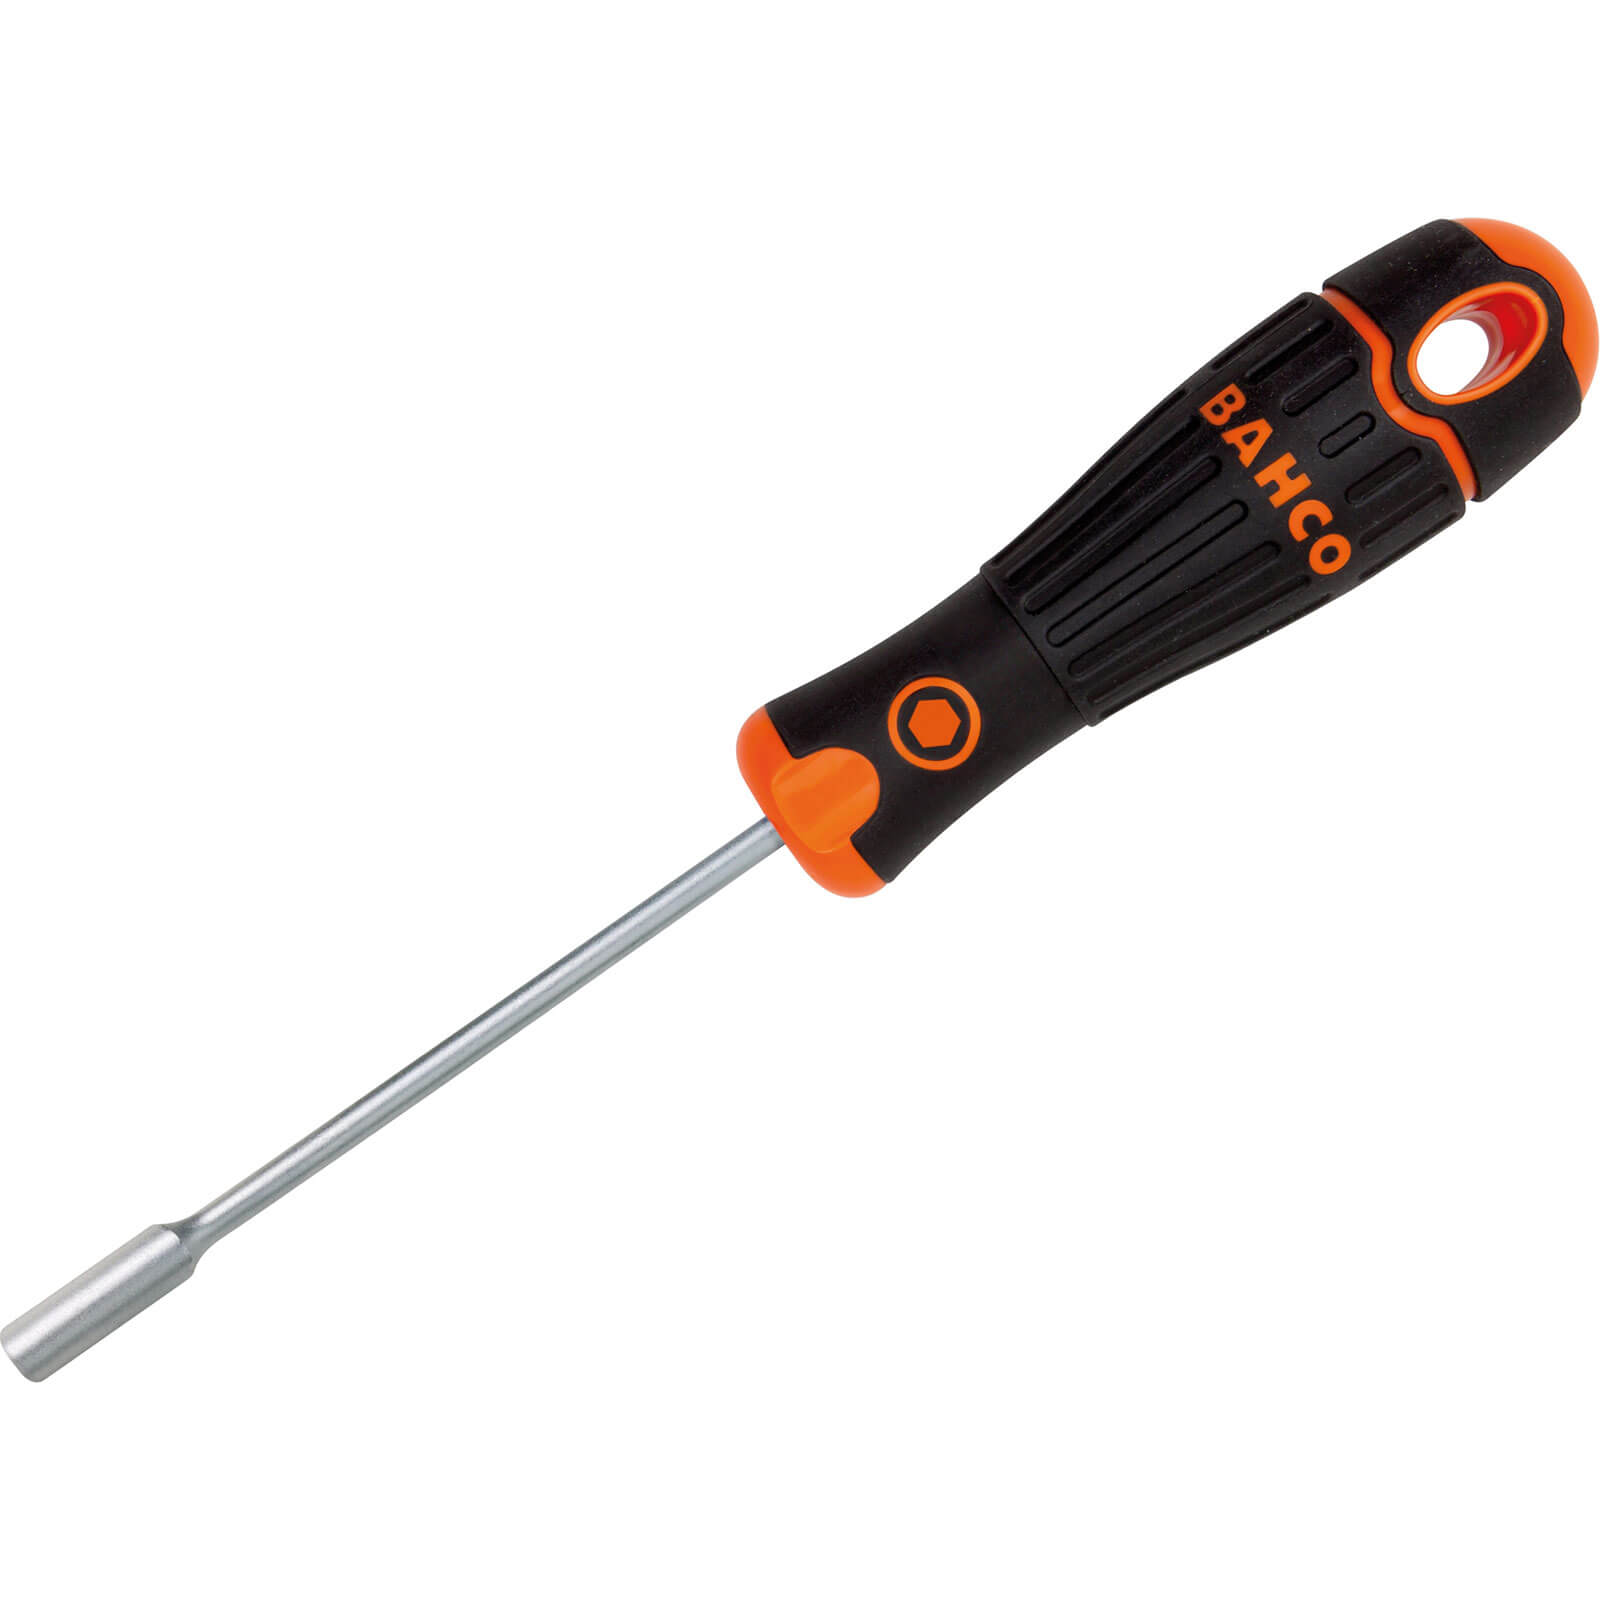 Photo of Bahco Bahcofit Nut Driver 6mm